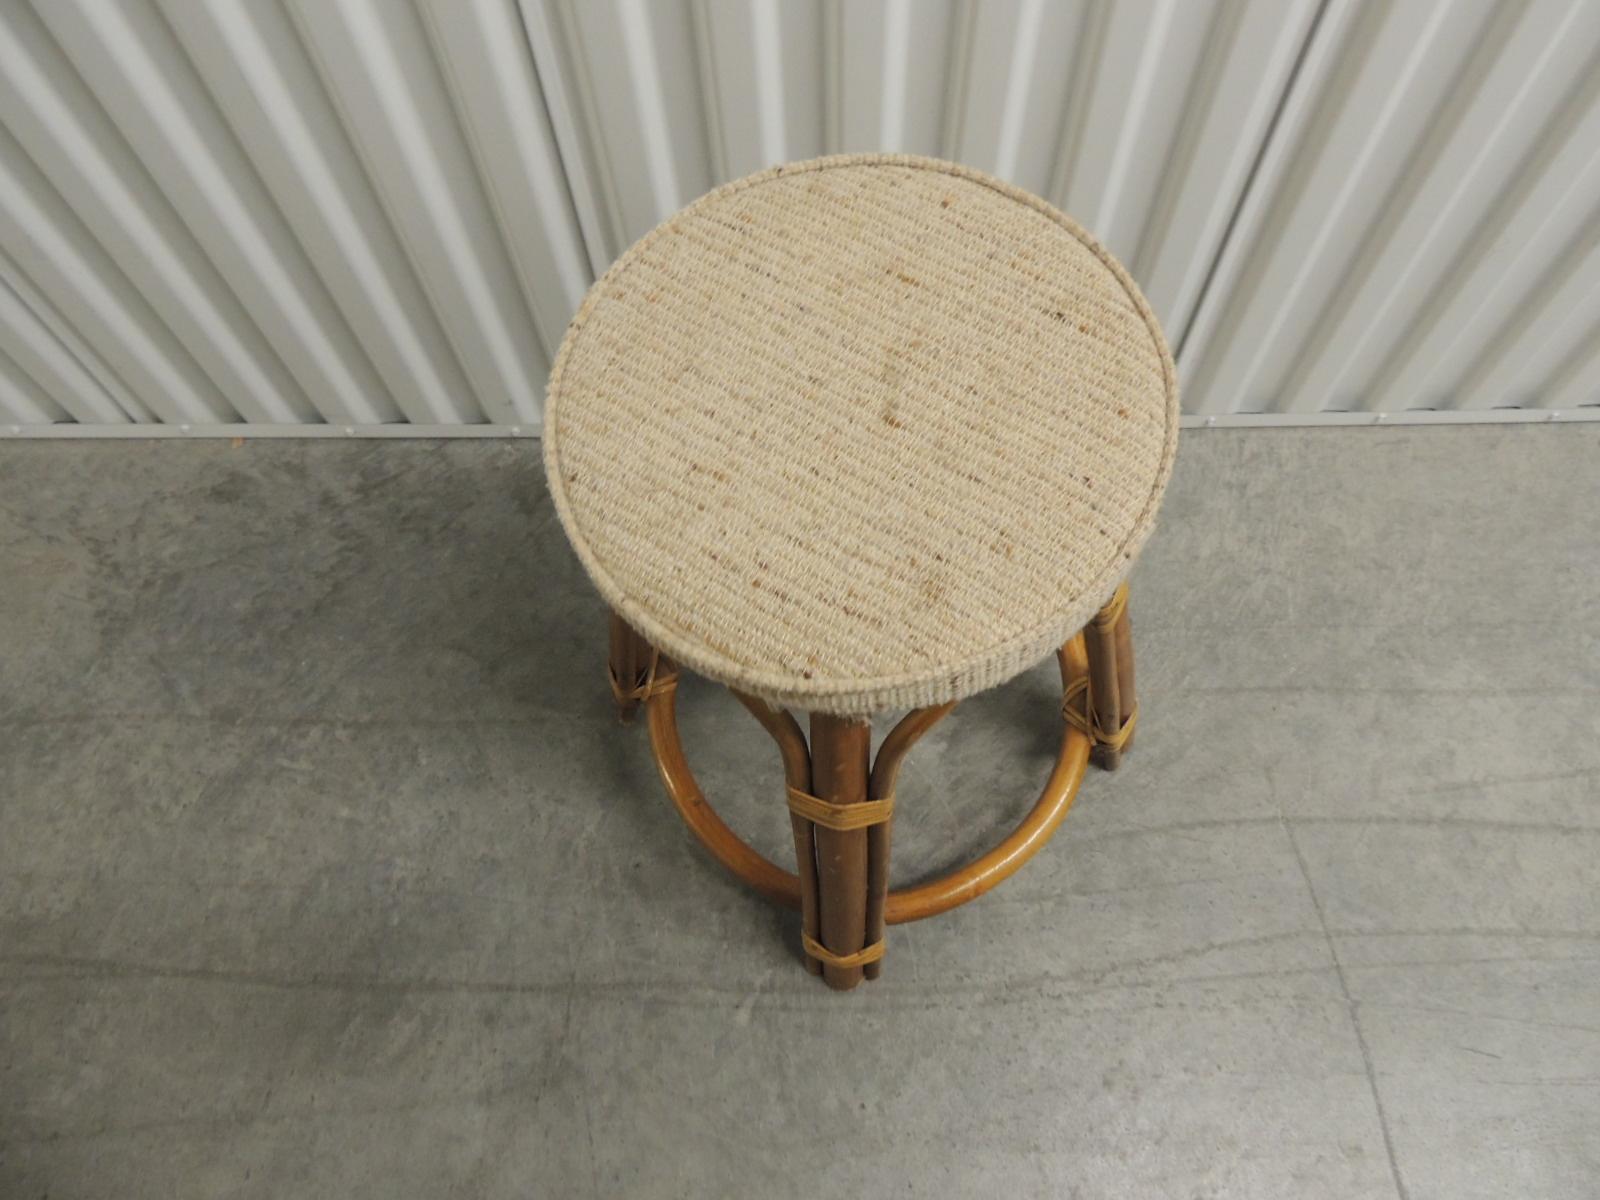 Vintage bamboo and rattan tall stool with upholstered round seat.
Bent bamboo tall stool with vintage beige grain sack fabric round seat.
Rattan details.
Size: 19.5 H x 12 D (base 18